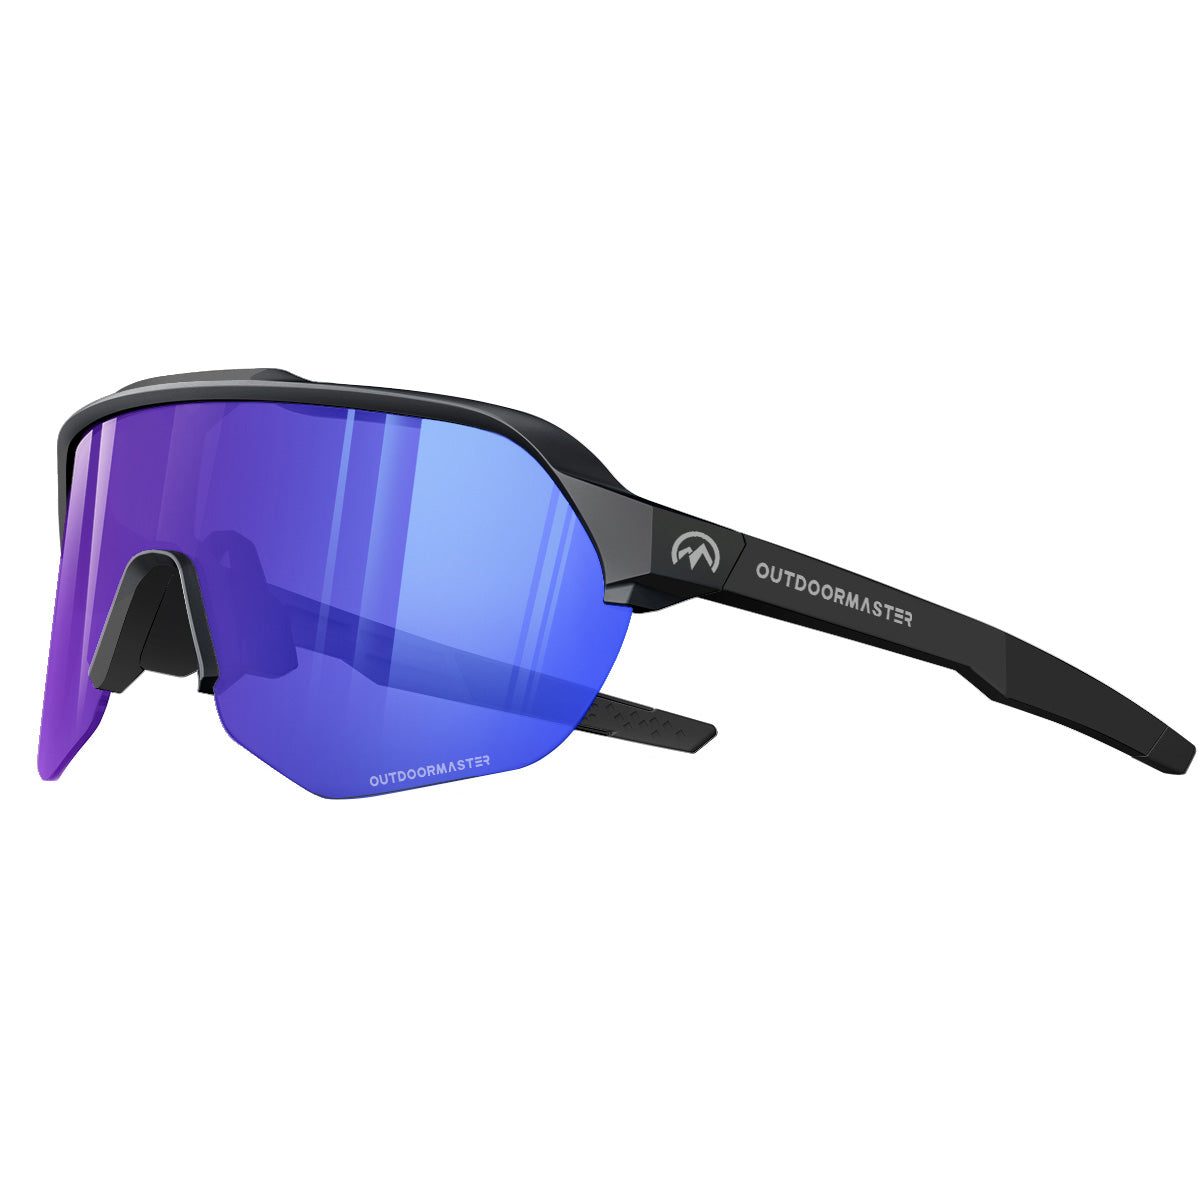 New Colorful Fashion Sports Outdoor Sunglasses